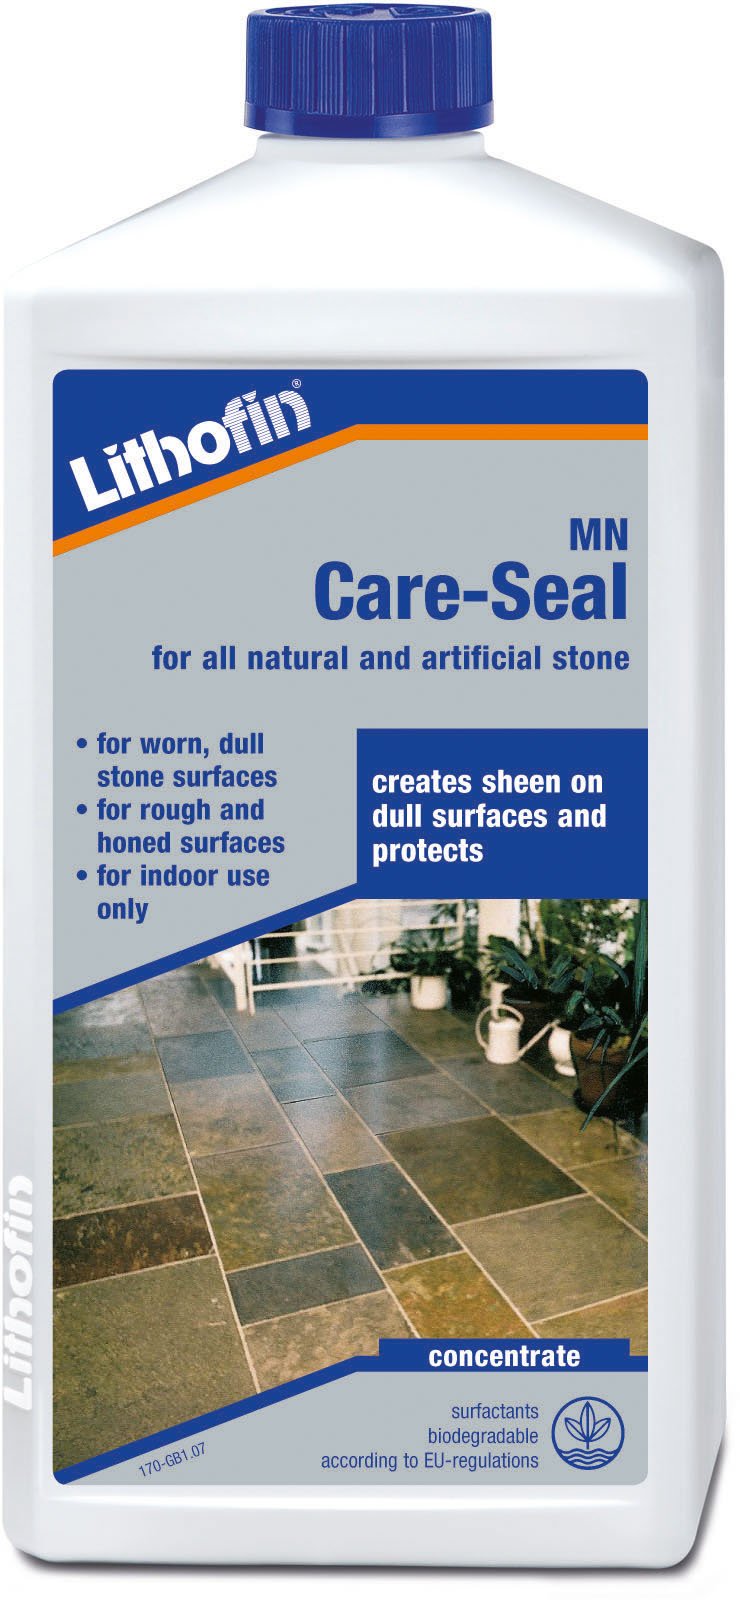 Lithofin Care Seal for all natural and artificial stone 